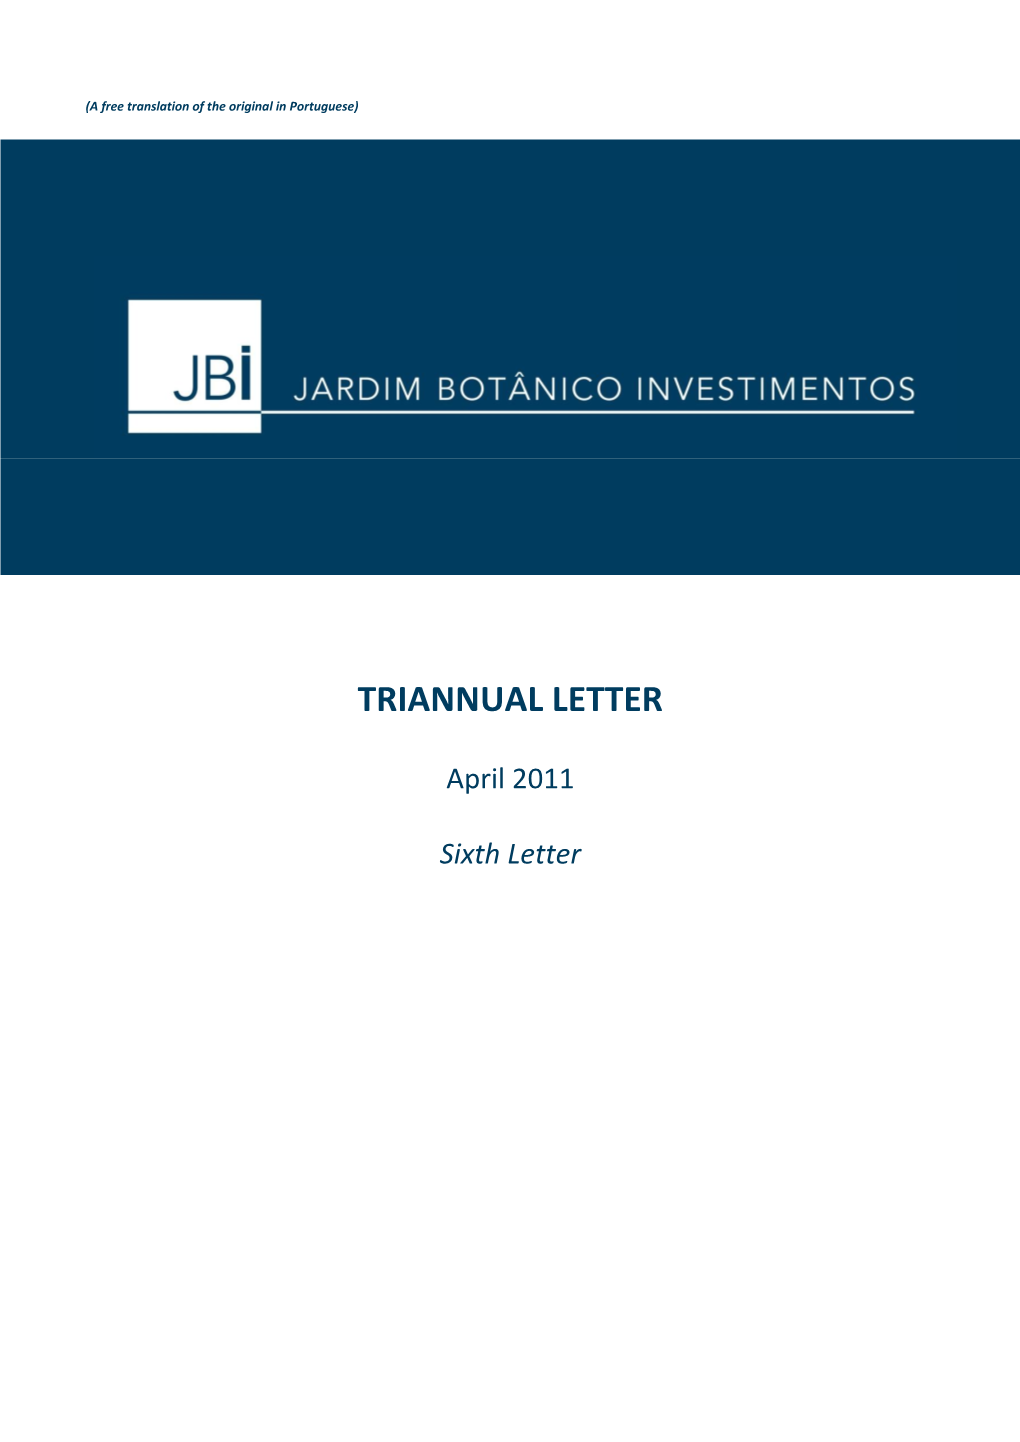 Triannual Letter